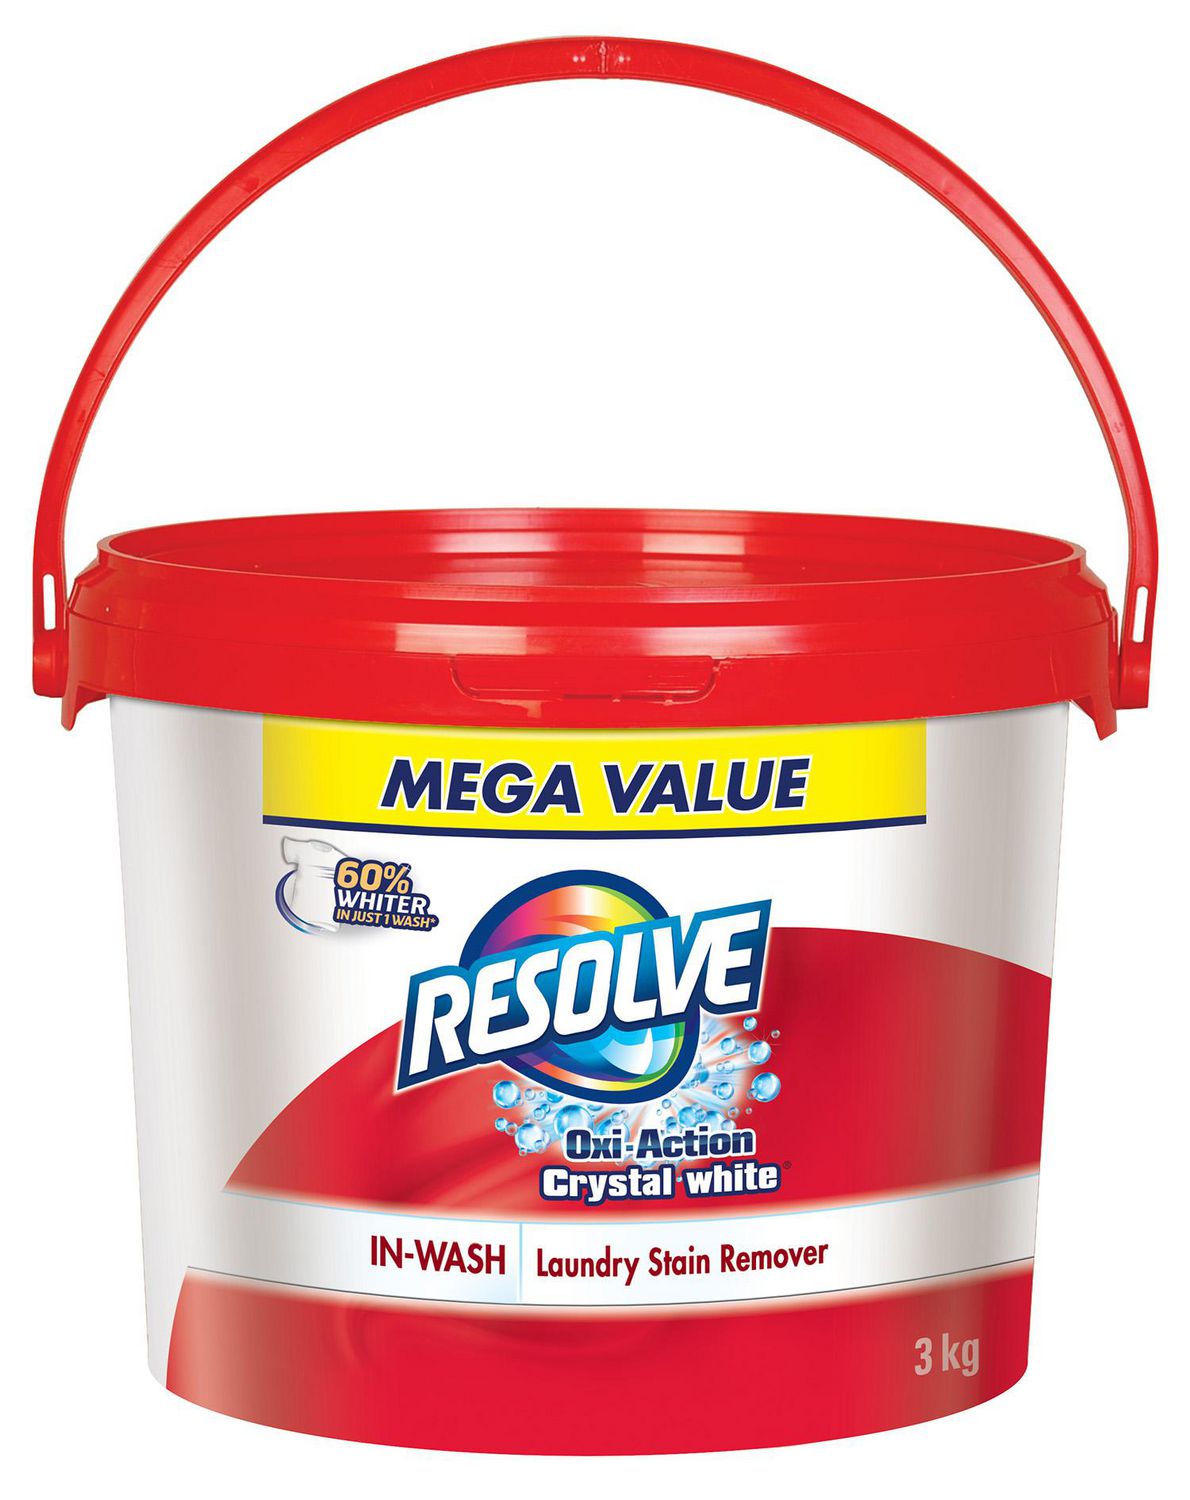 Resolve, Multi Power, Oxi-Action, Amazing Stain Remover, In-Wash Powder,  All Colours, 1.35kg, 1.35kg 